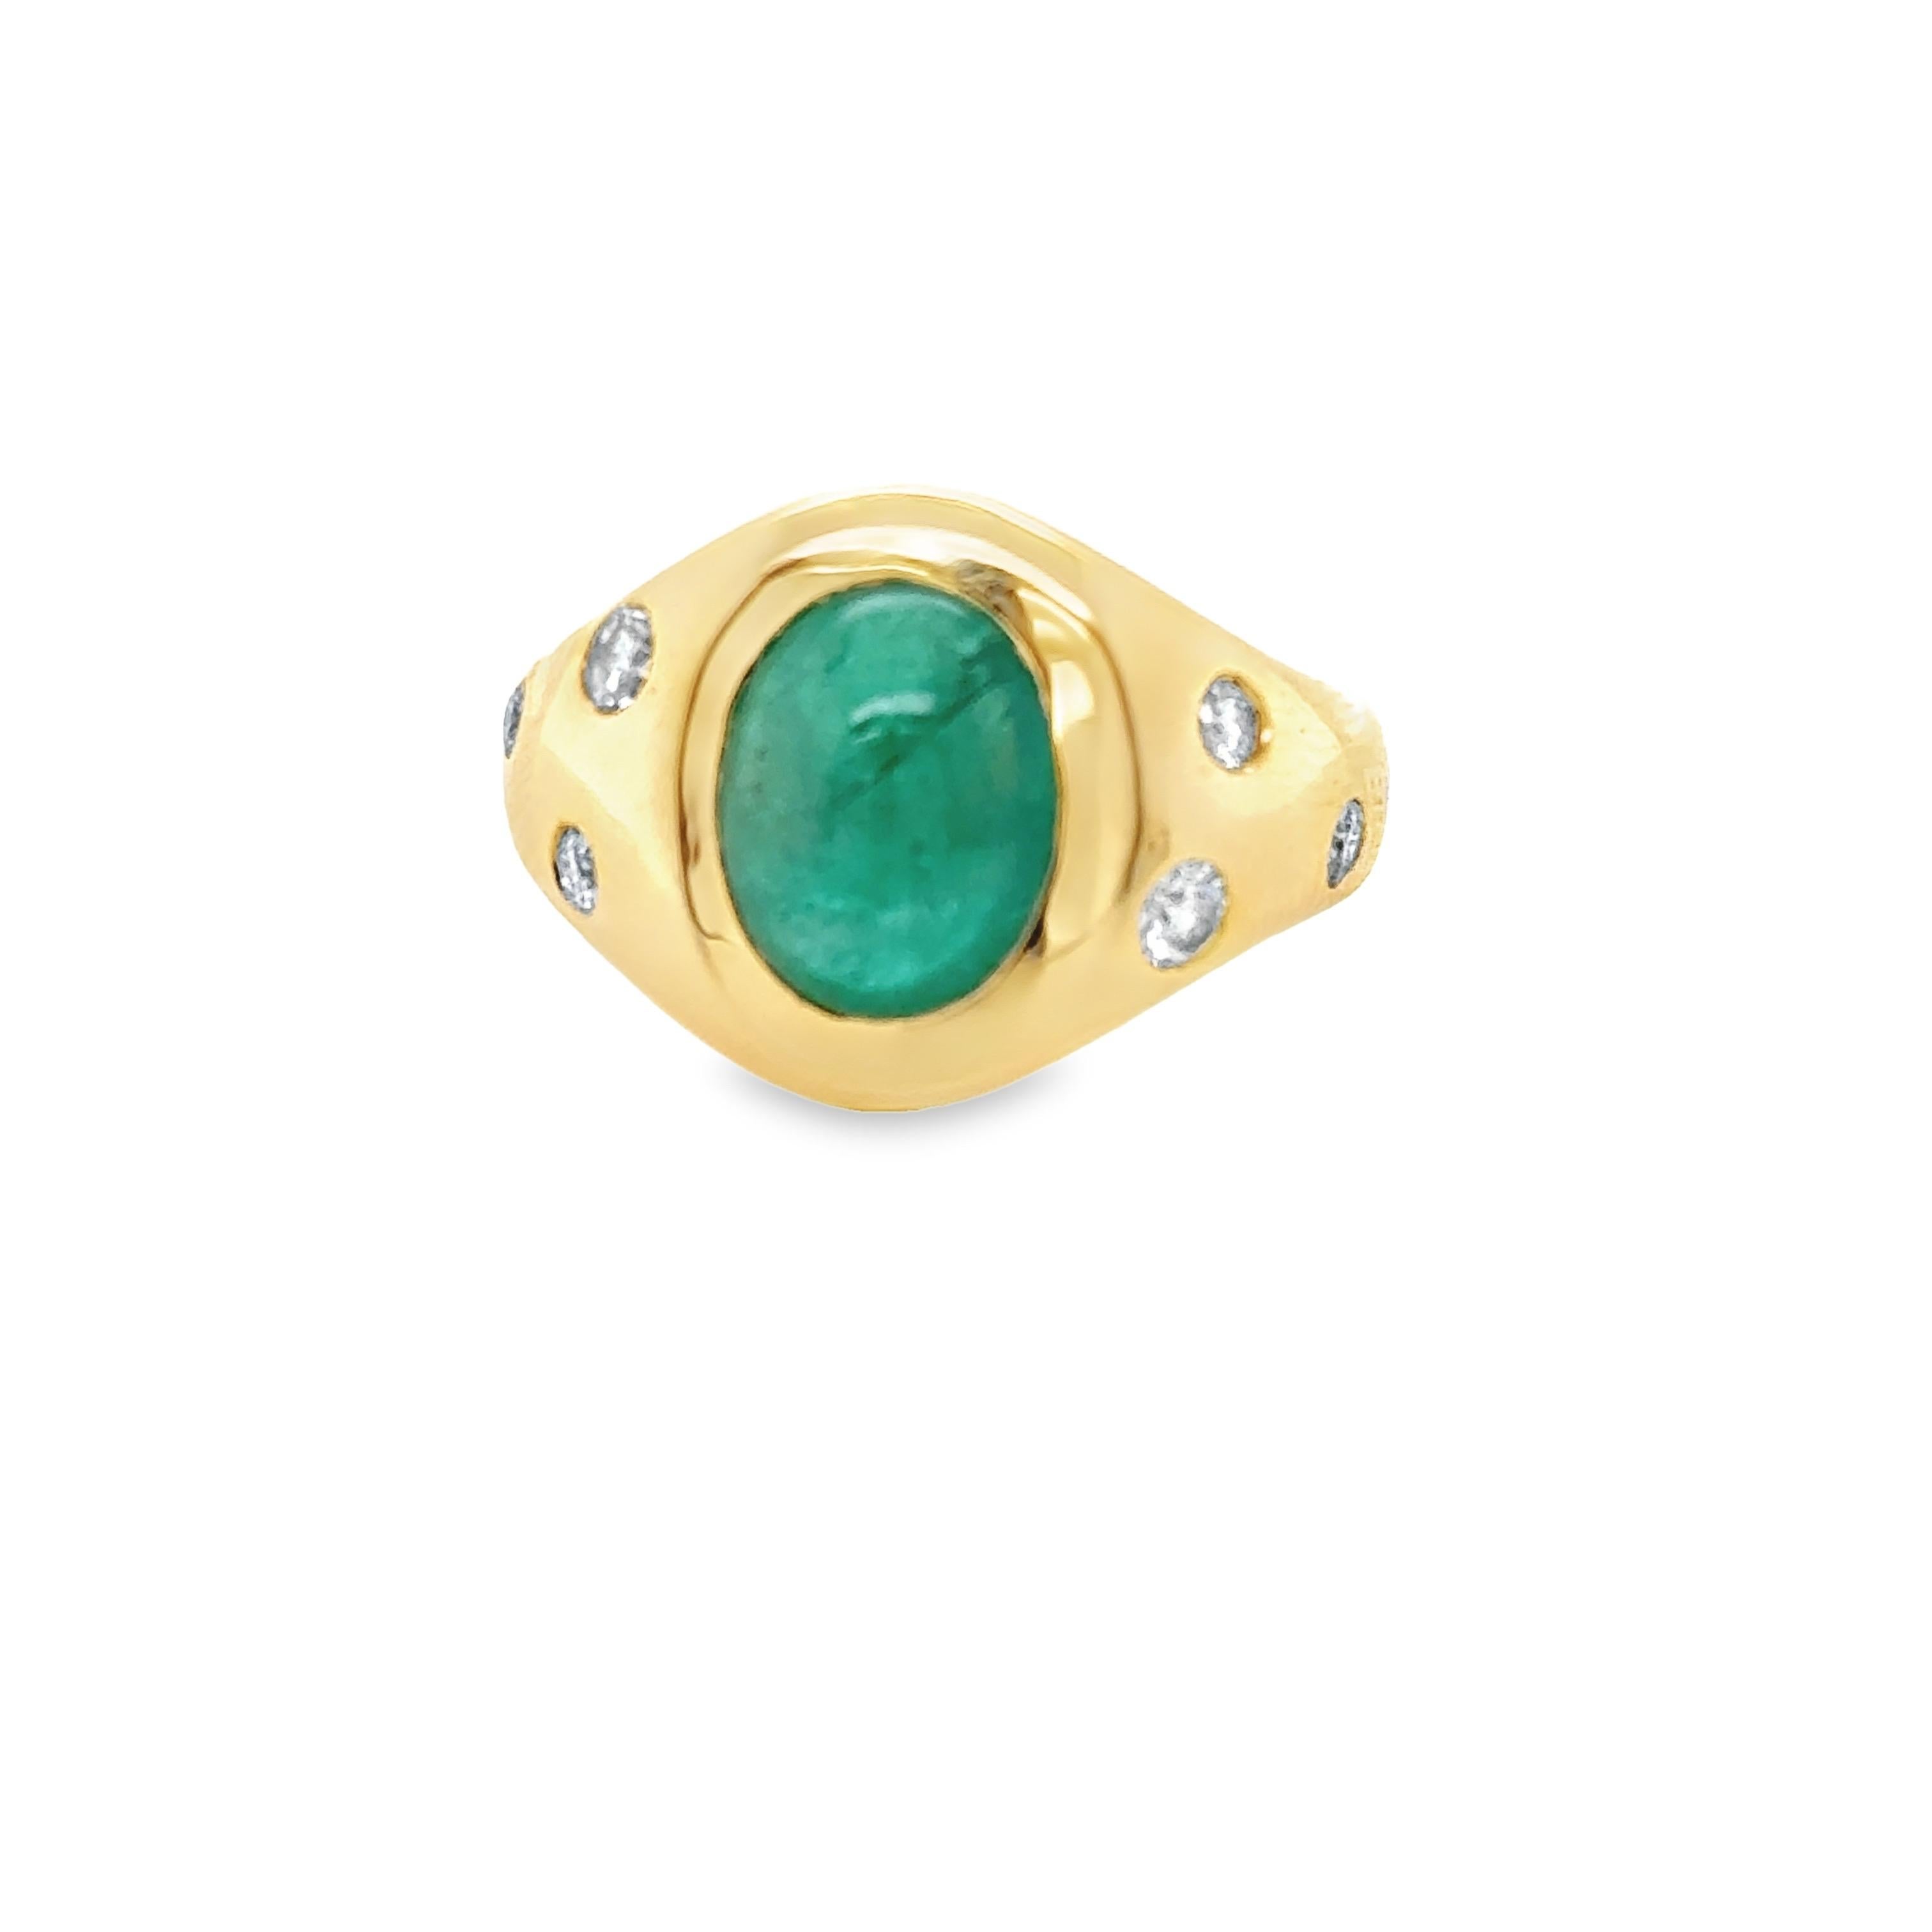 Beautiful Oval Cabochon Emerald & Diamond Cocktail Ring features a 3.42 carats Natural Beryl Oval Vivid Green Zambian Cabochon Emerald with 7 Round Brilliant shape Diamonds set in 18k Yellow Gold.

 Total diamond weight is 0.39 carats. Ring size is